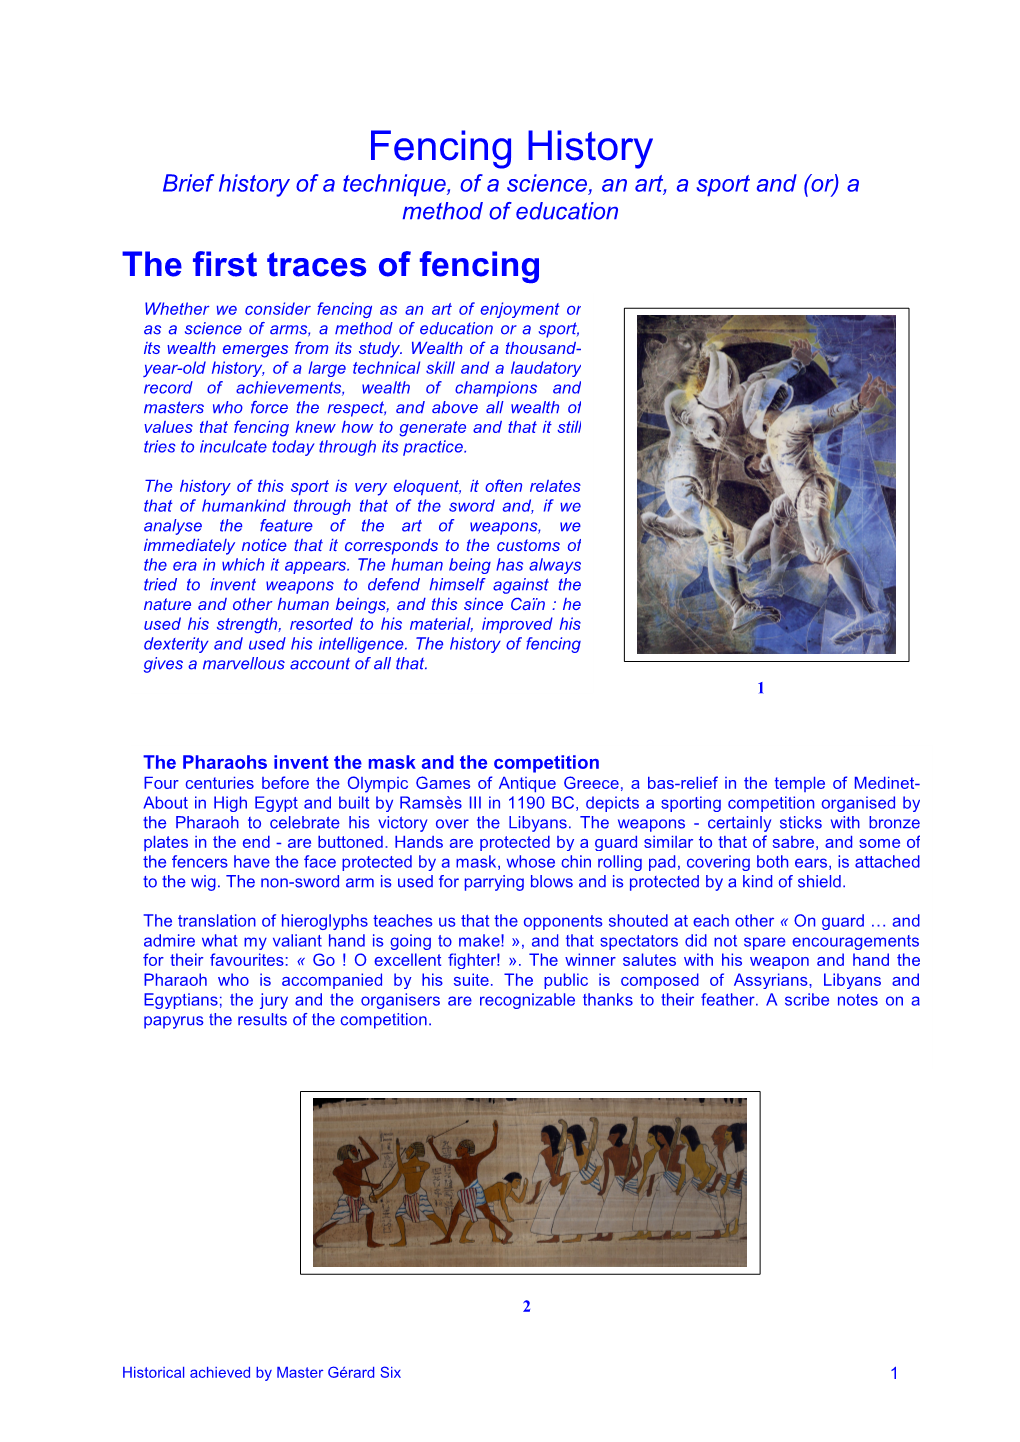 Fencing History Brief History of a Technique, of a Science, an Art, a Sport and (Or) a Method of Education